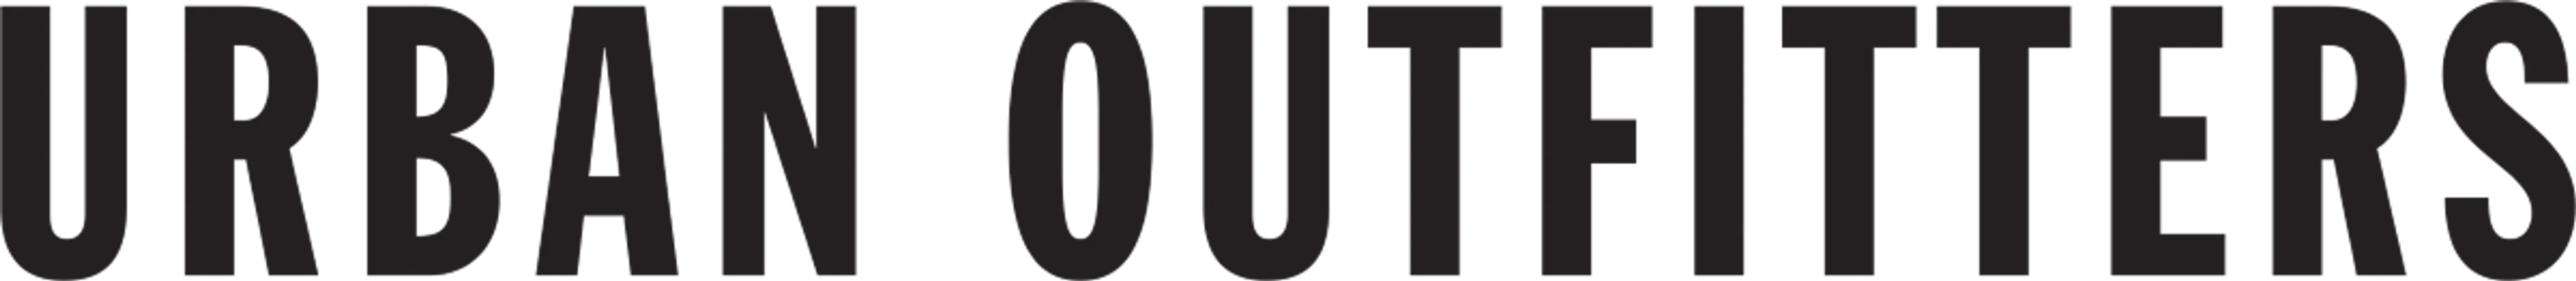 URBAN OUTFITTERS logo